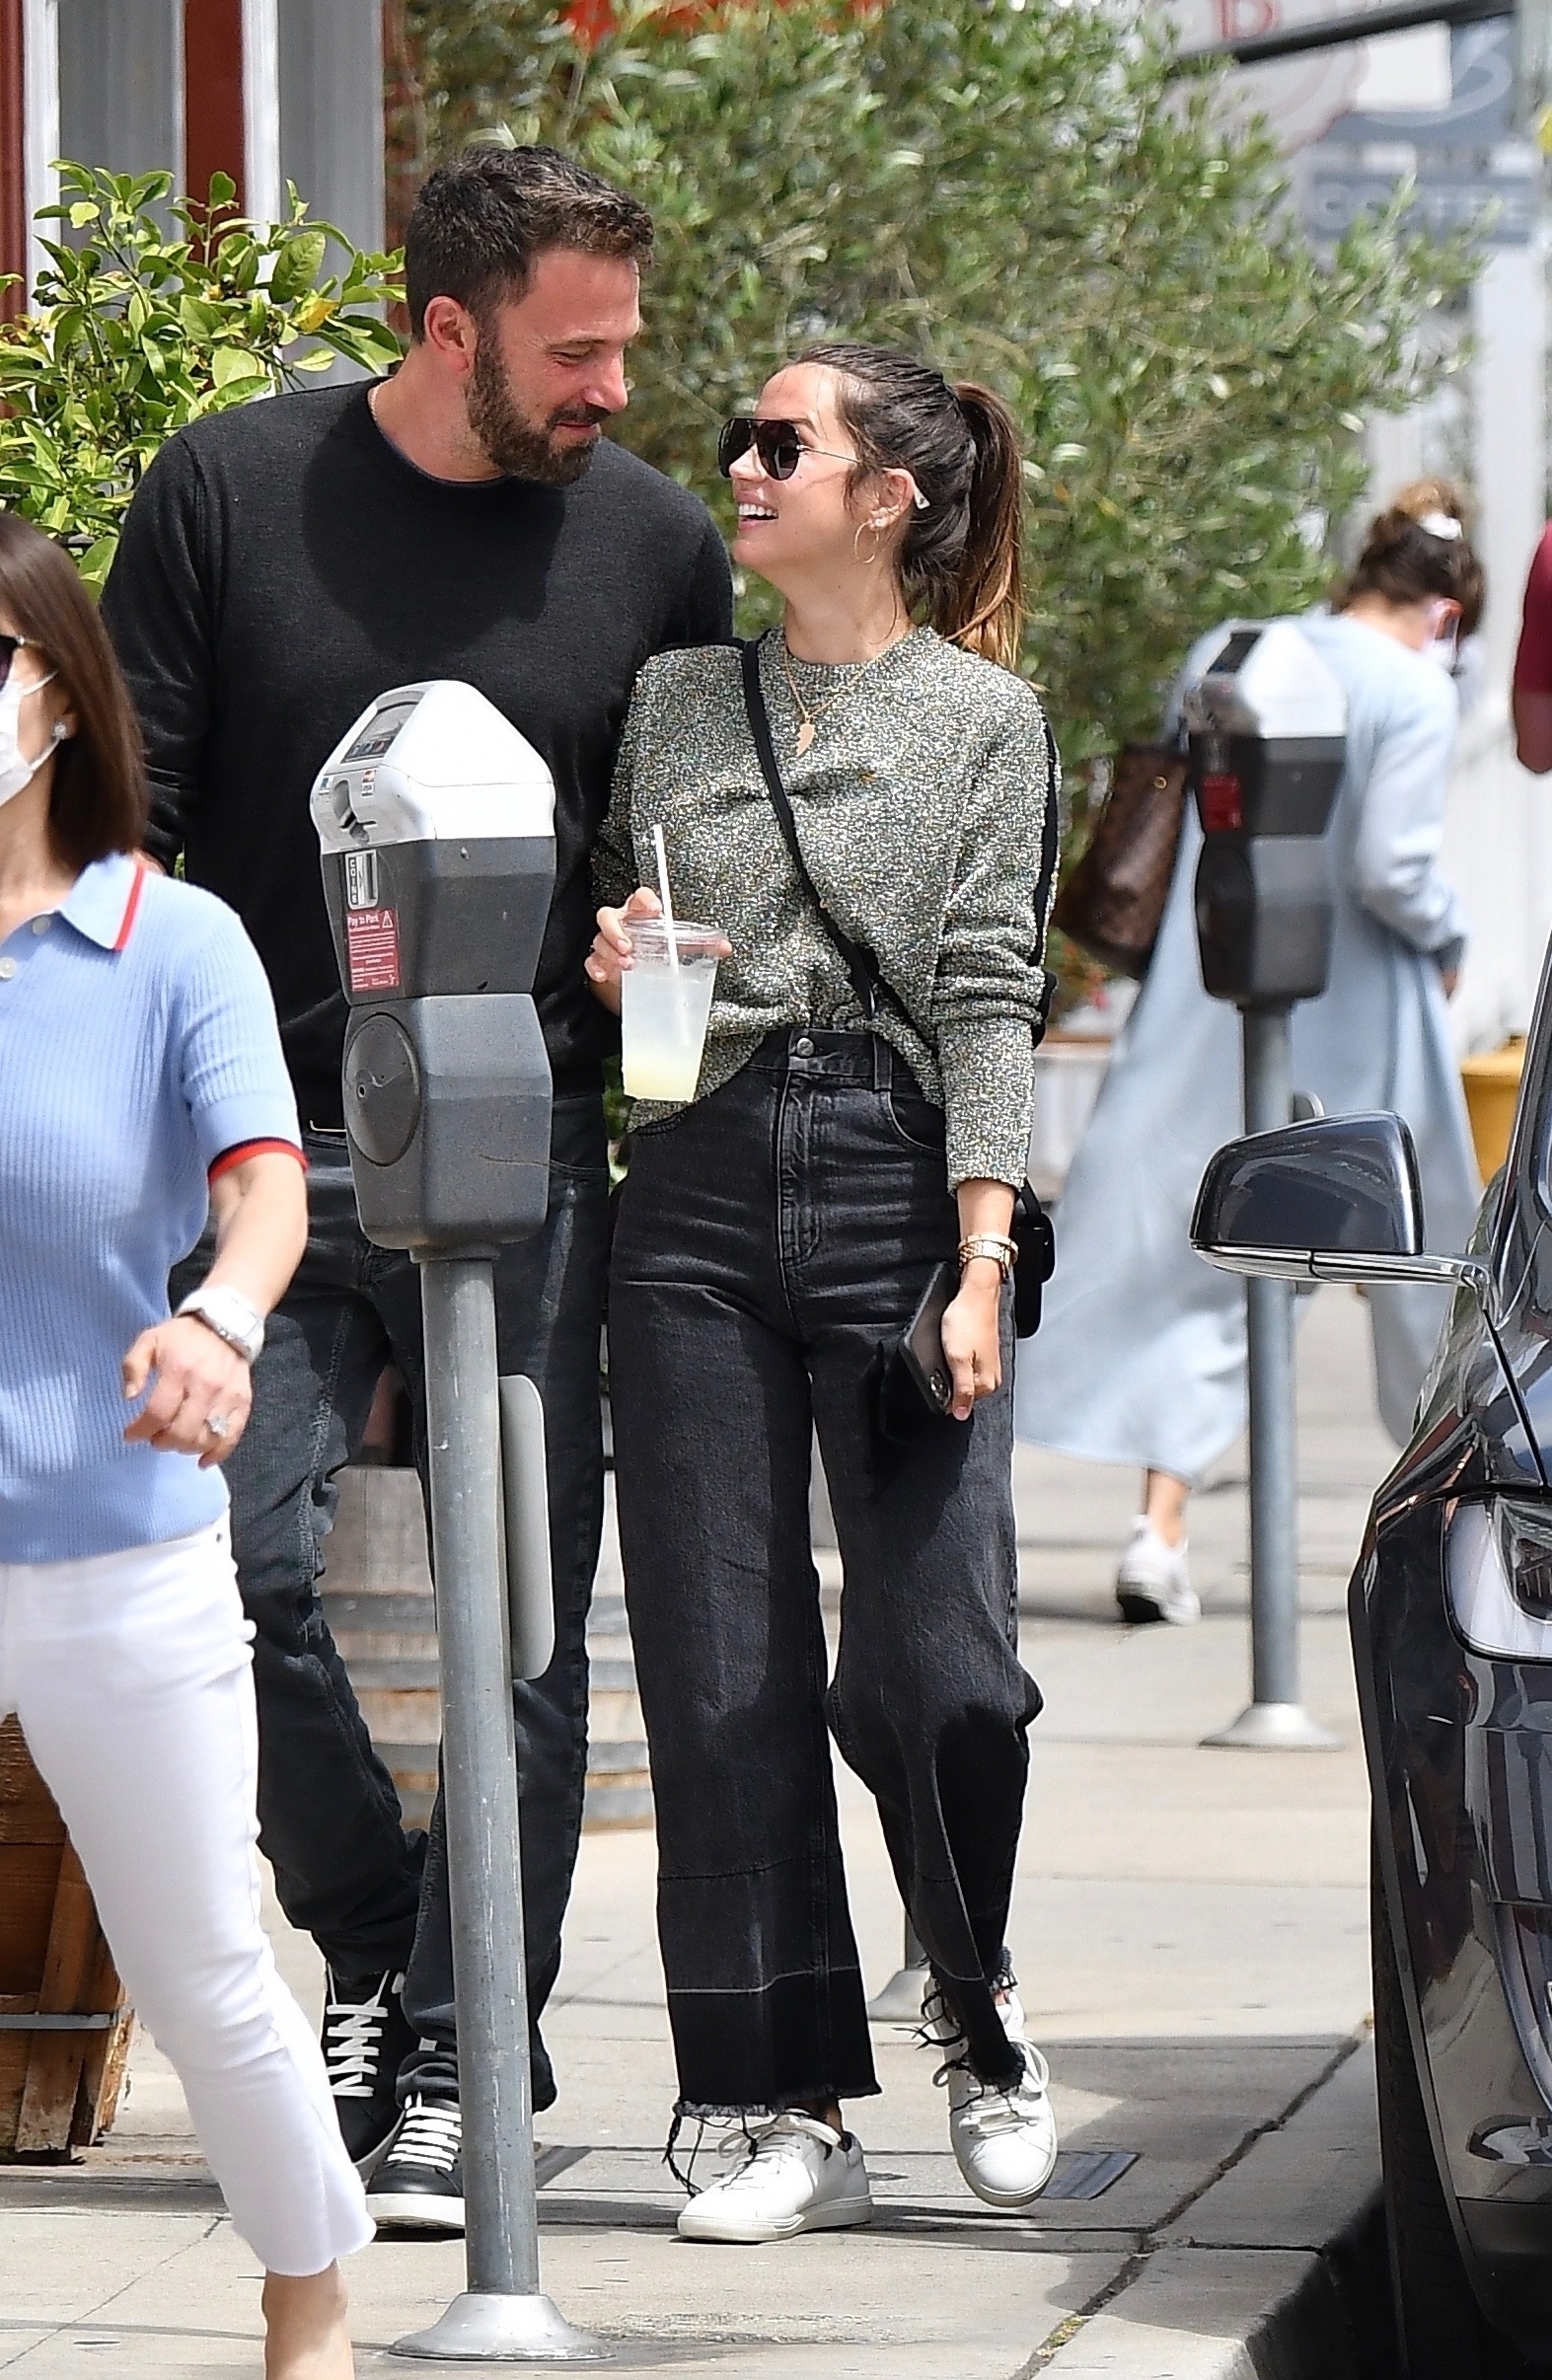 Ben Affleck and Ana de Armas go out for lunch together at the Brentwood Country Mart